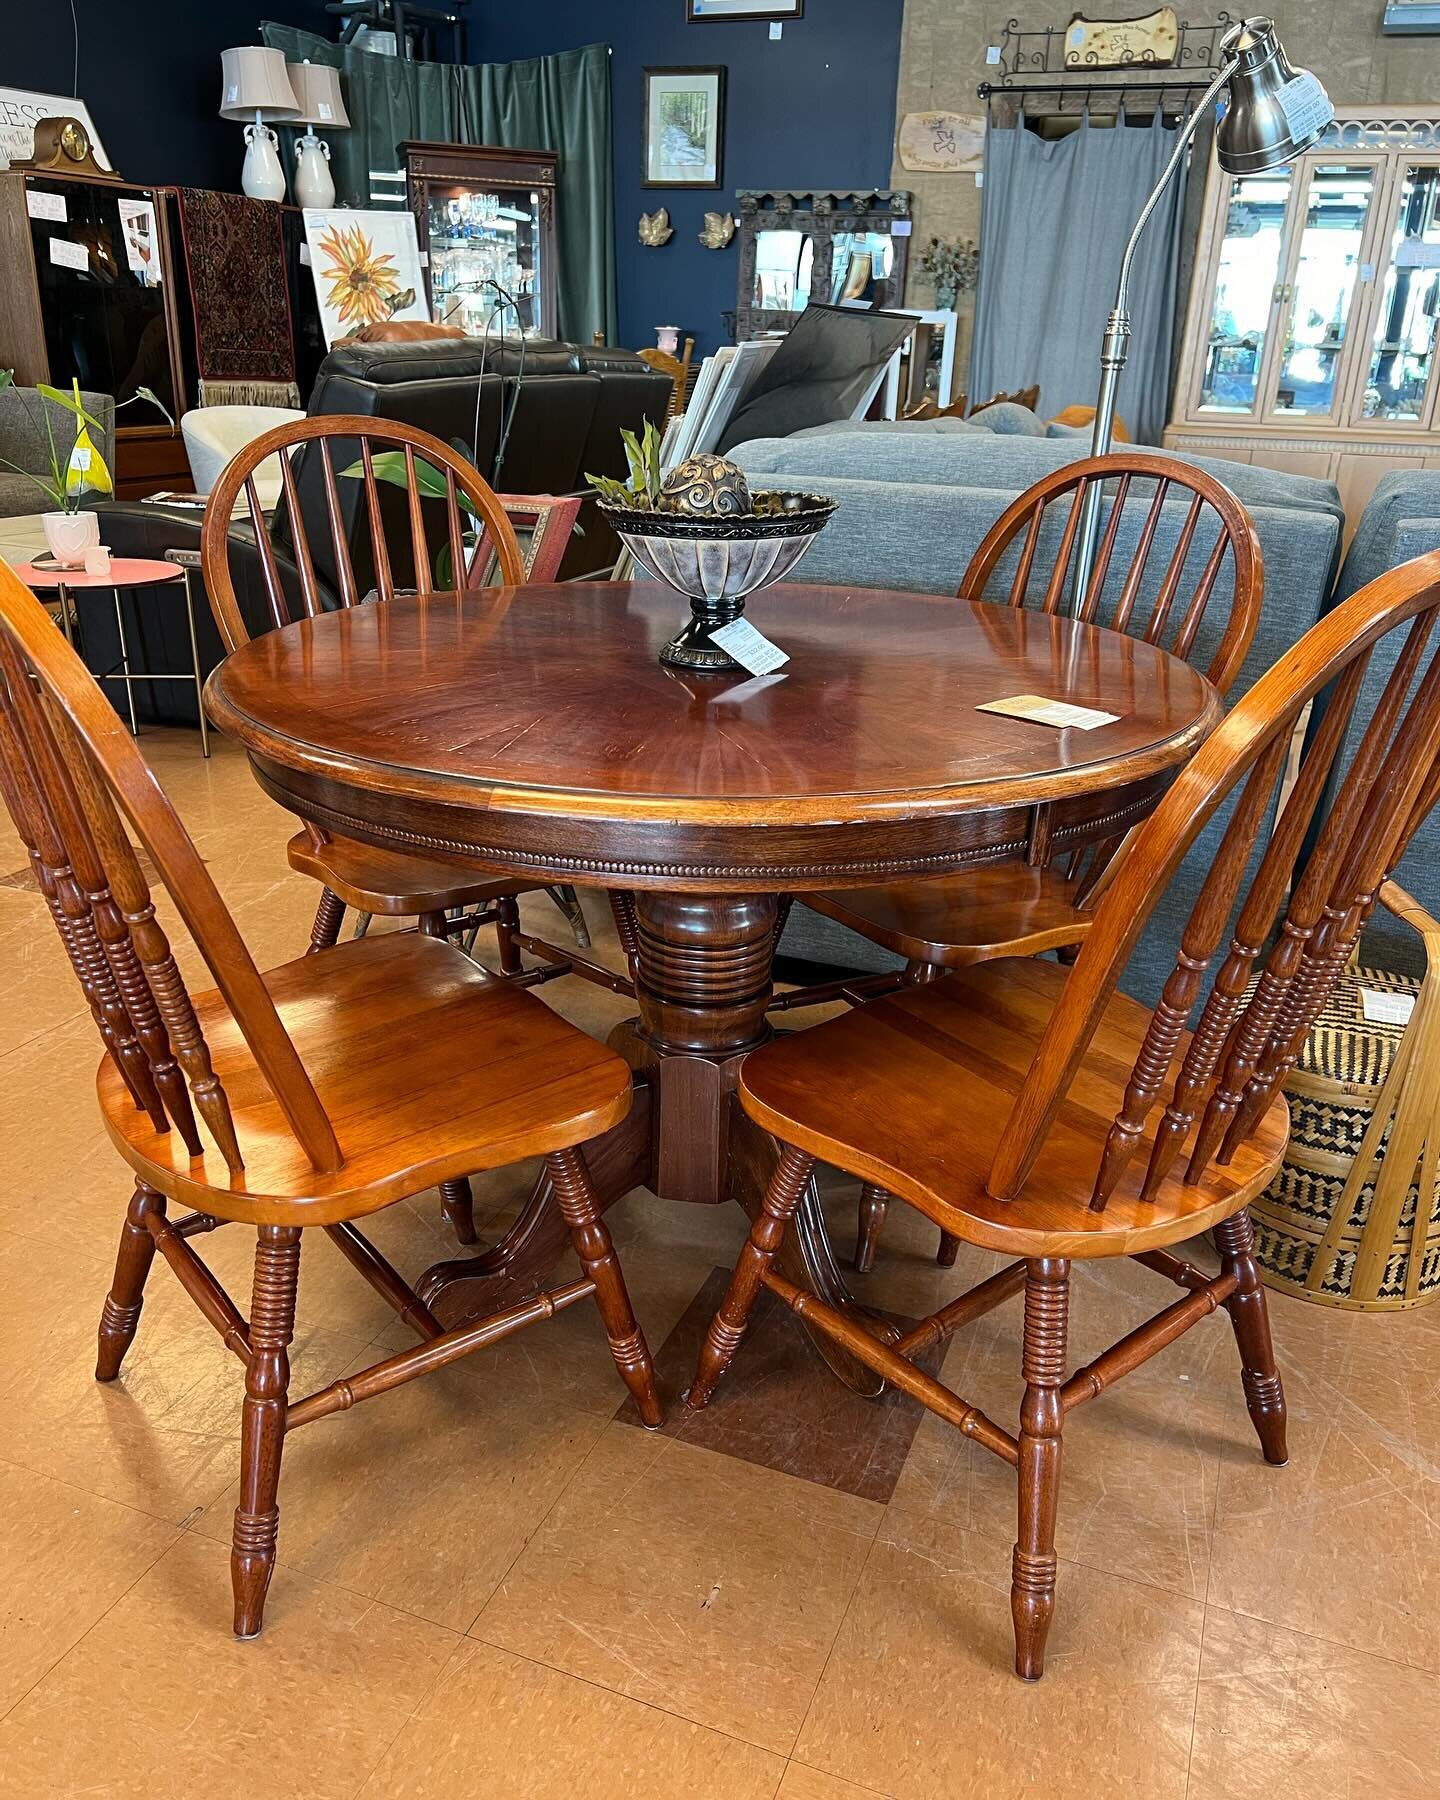 Super cute round dinette with a beautiful carved detail around the apron!